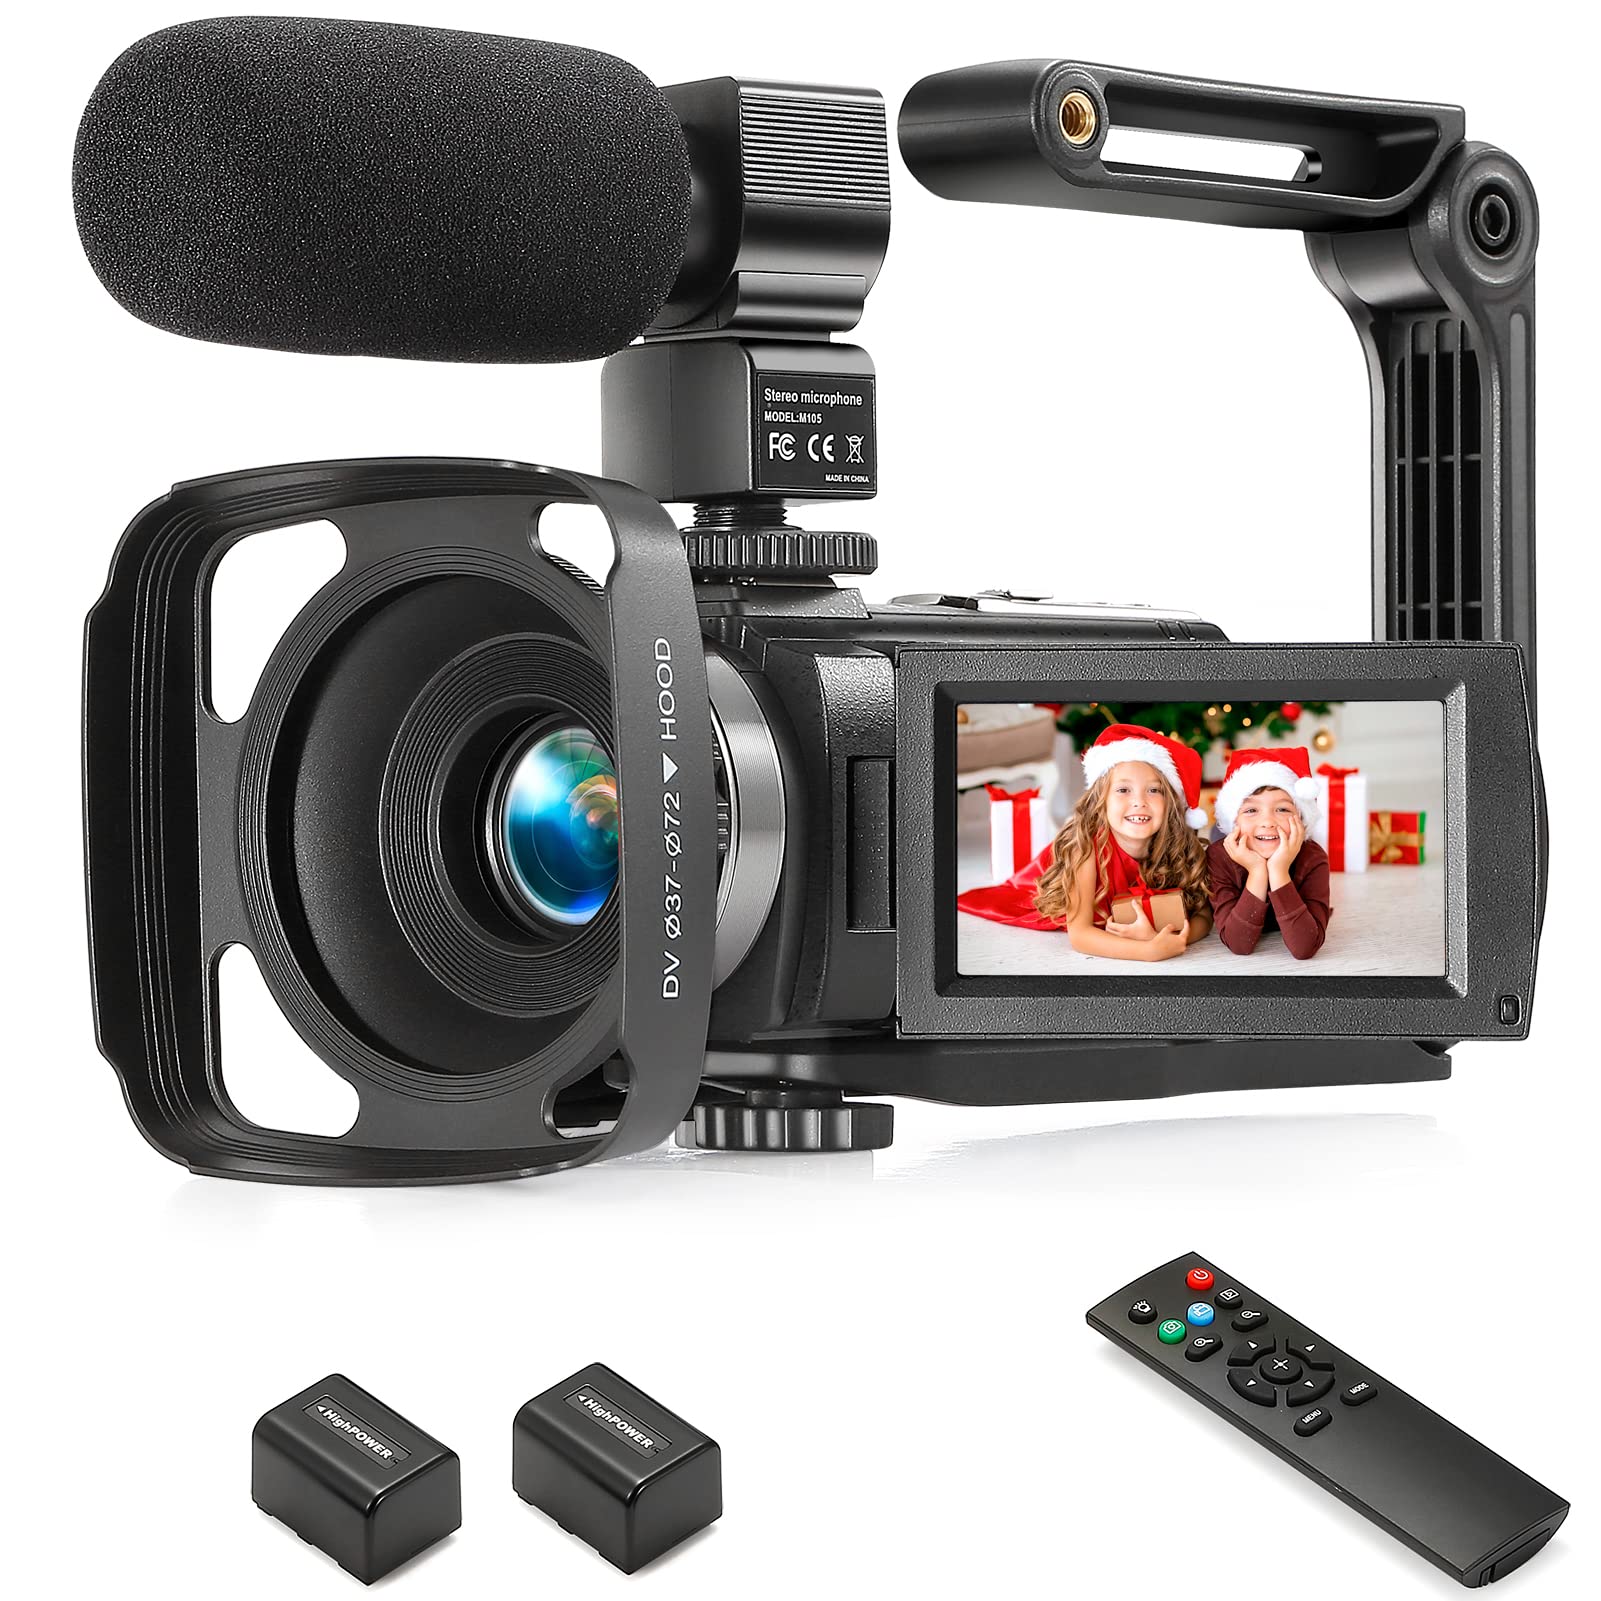 LKX Video Camera Camcorder Full HD 1080P 36.0 MP Webcam YouTube Vlogging Camera Recorder, 16X Digital Zoom Touch Screen Camcorders Camera with Microphone, Remote, Stabilizer, Lens Hood, 2 Batteries